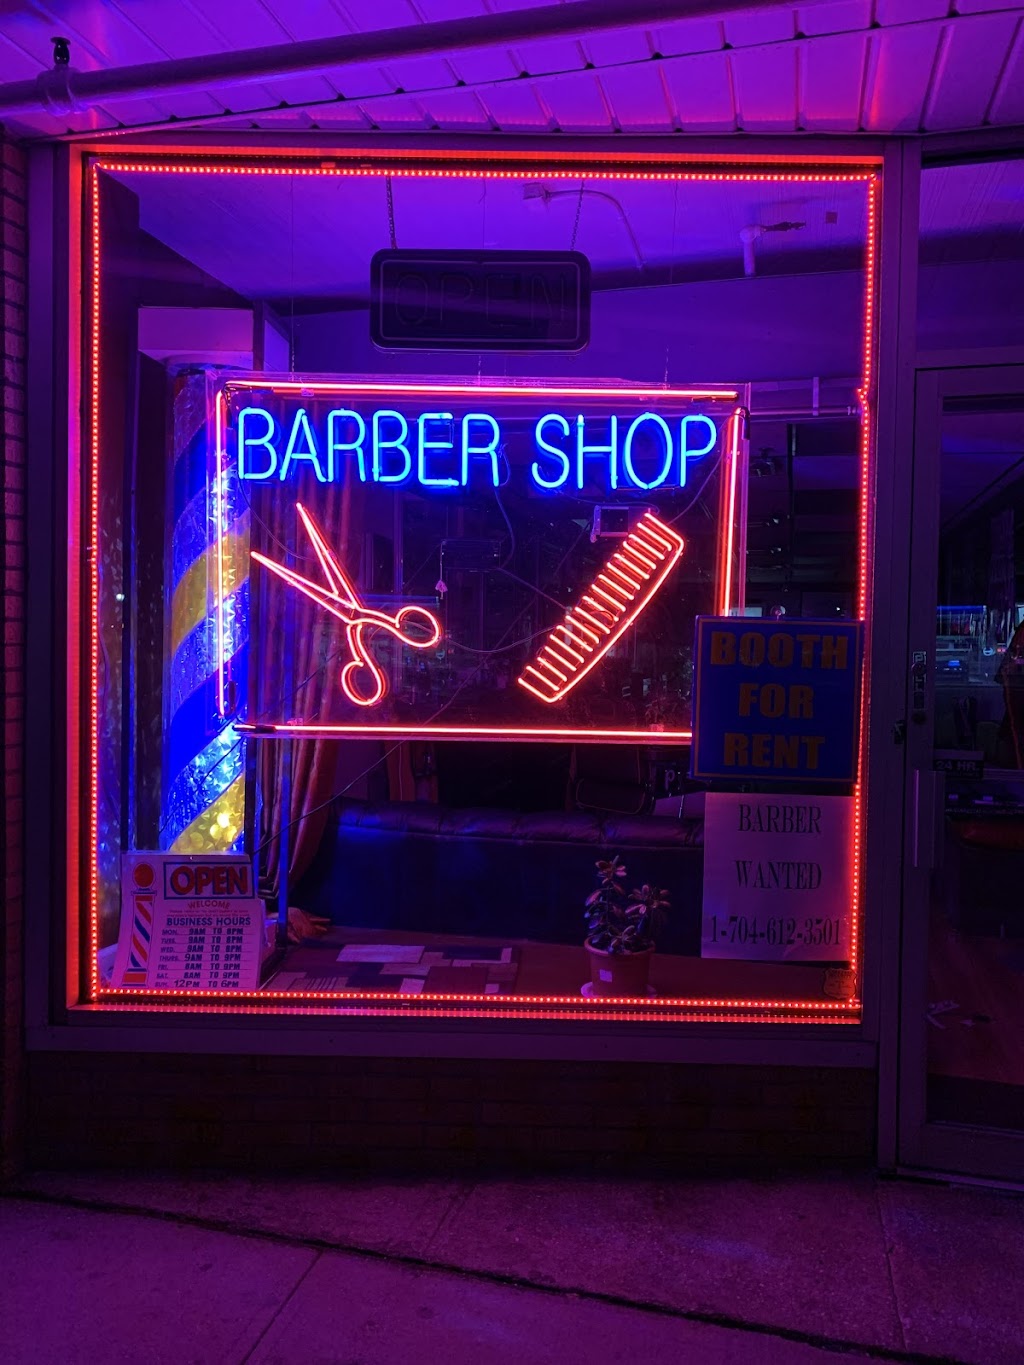 Another Level Barbershop | 1213 Grand Ave, Baldwin, NY 11510 | Phone: (704) 612-3501